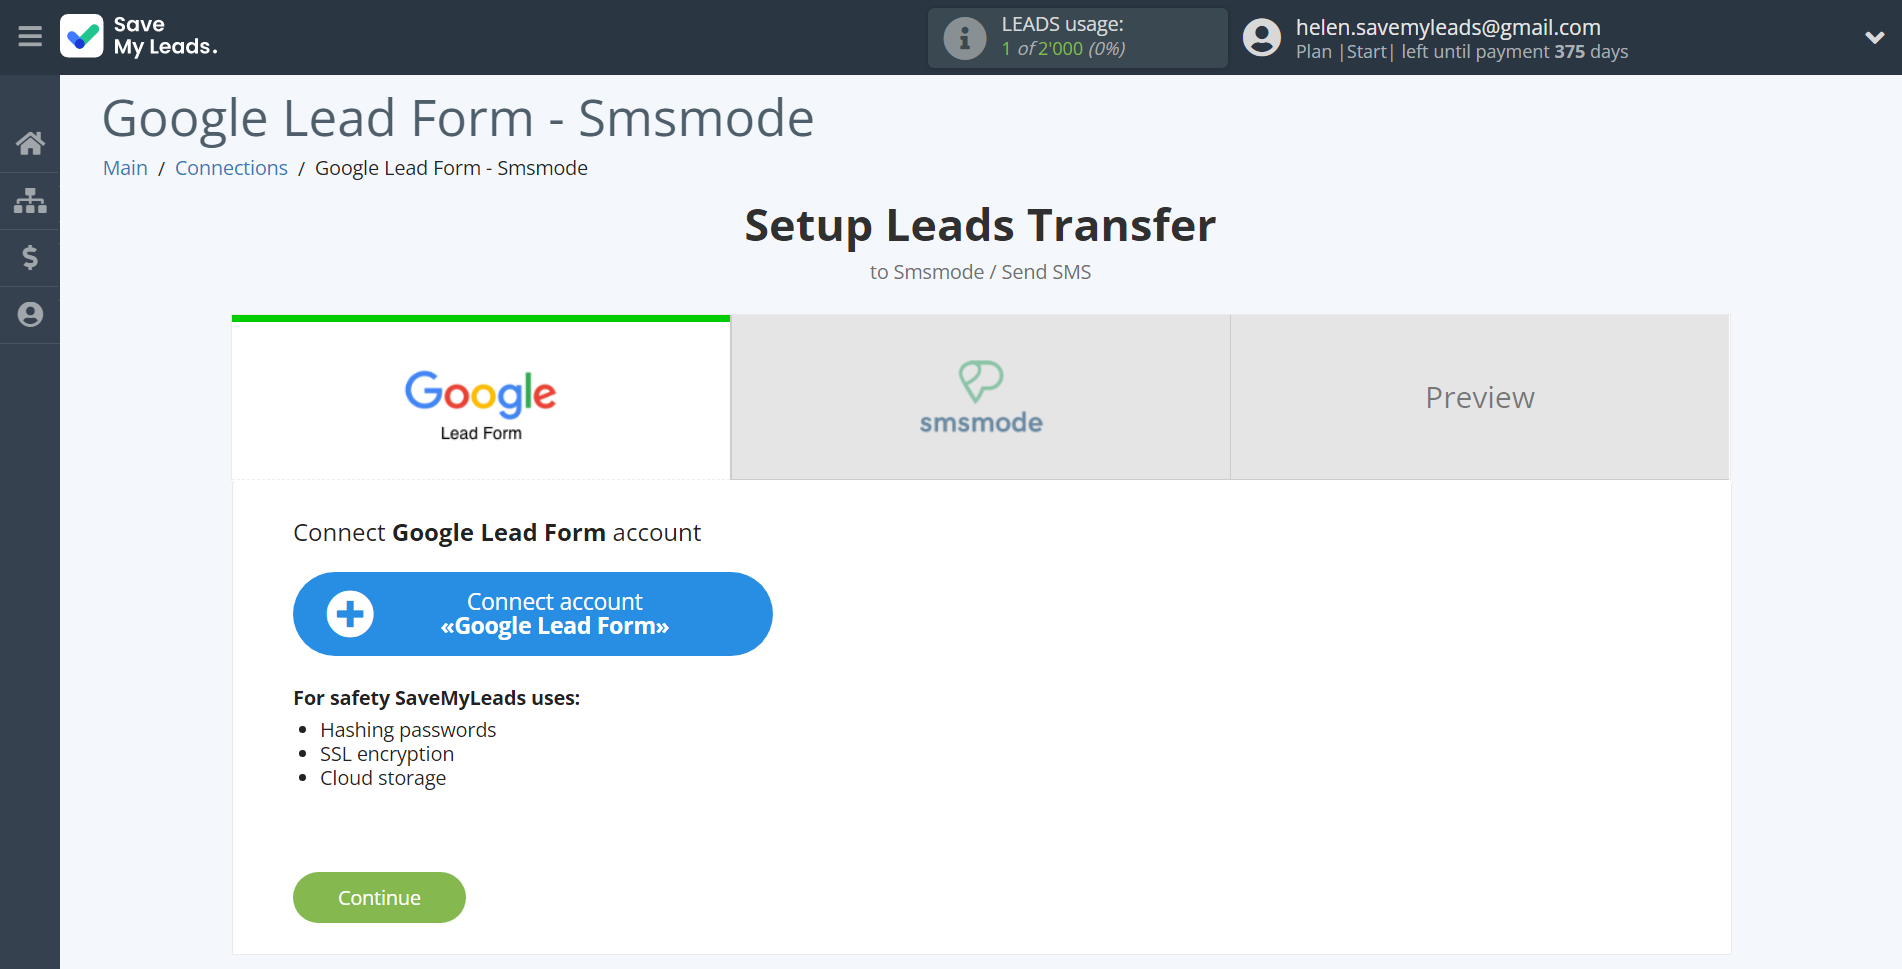 How to Connect Google Lead Form with Smsmode | Data Source account